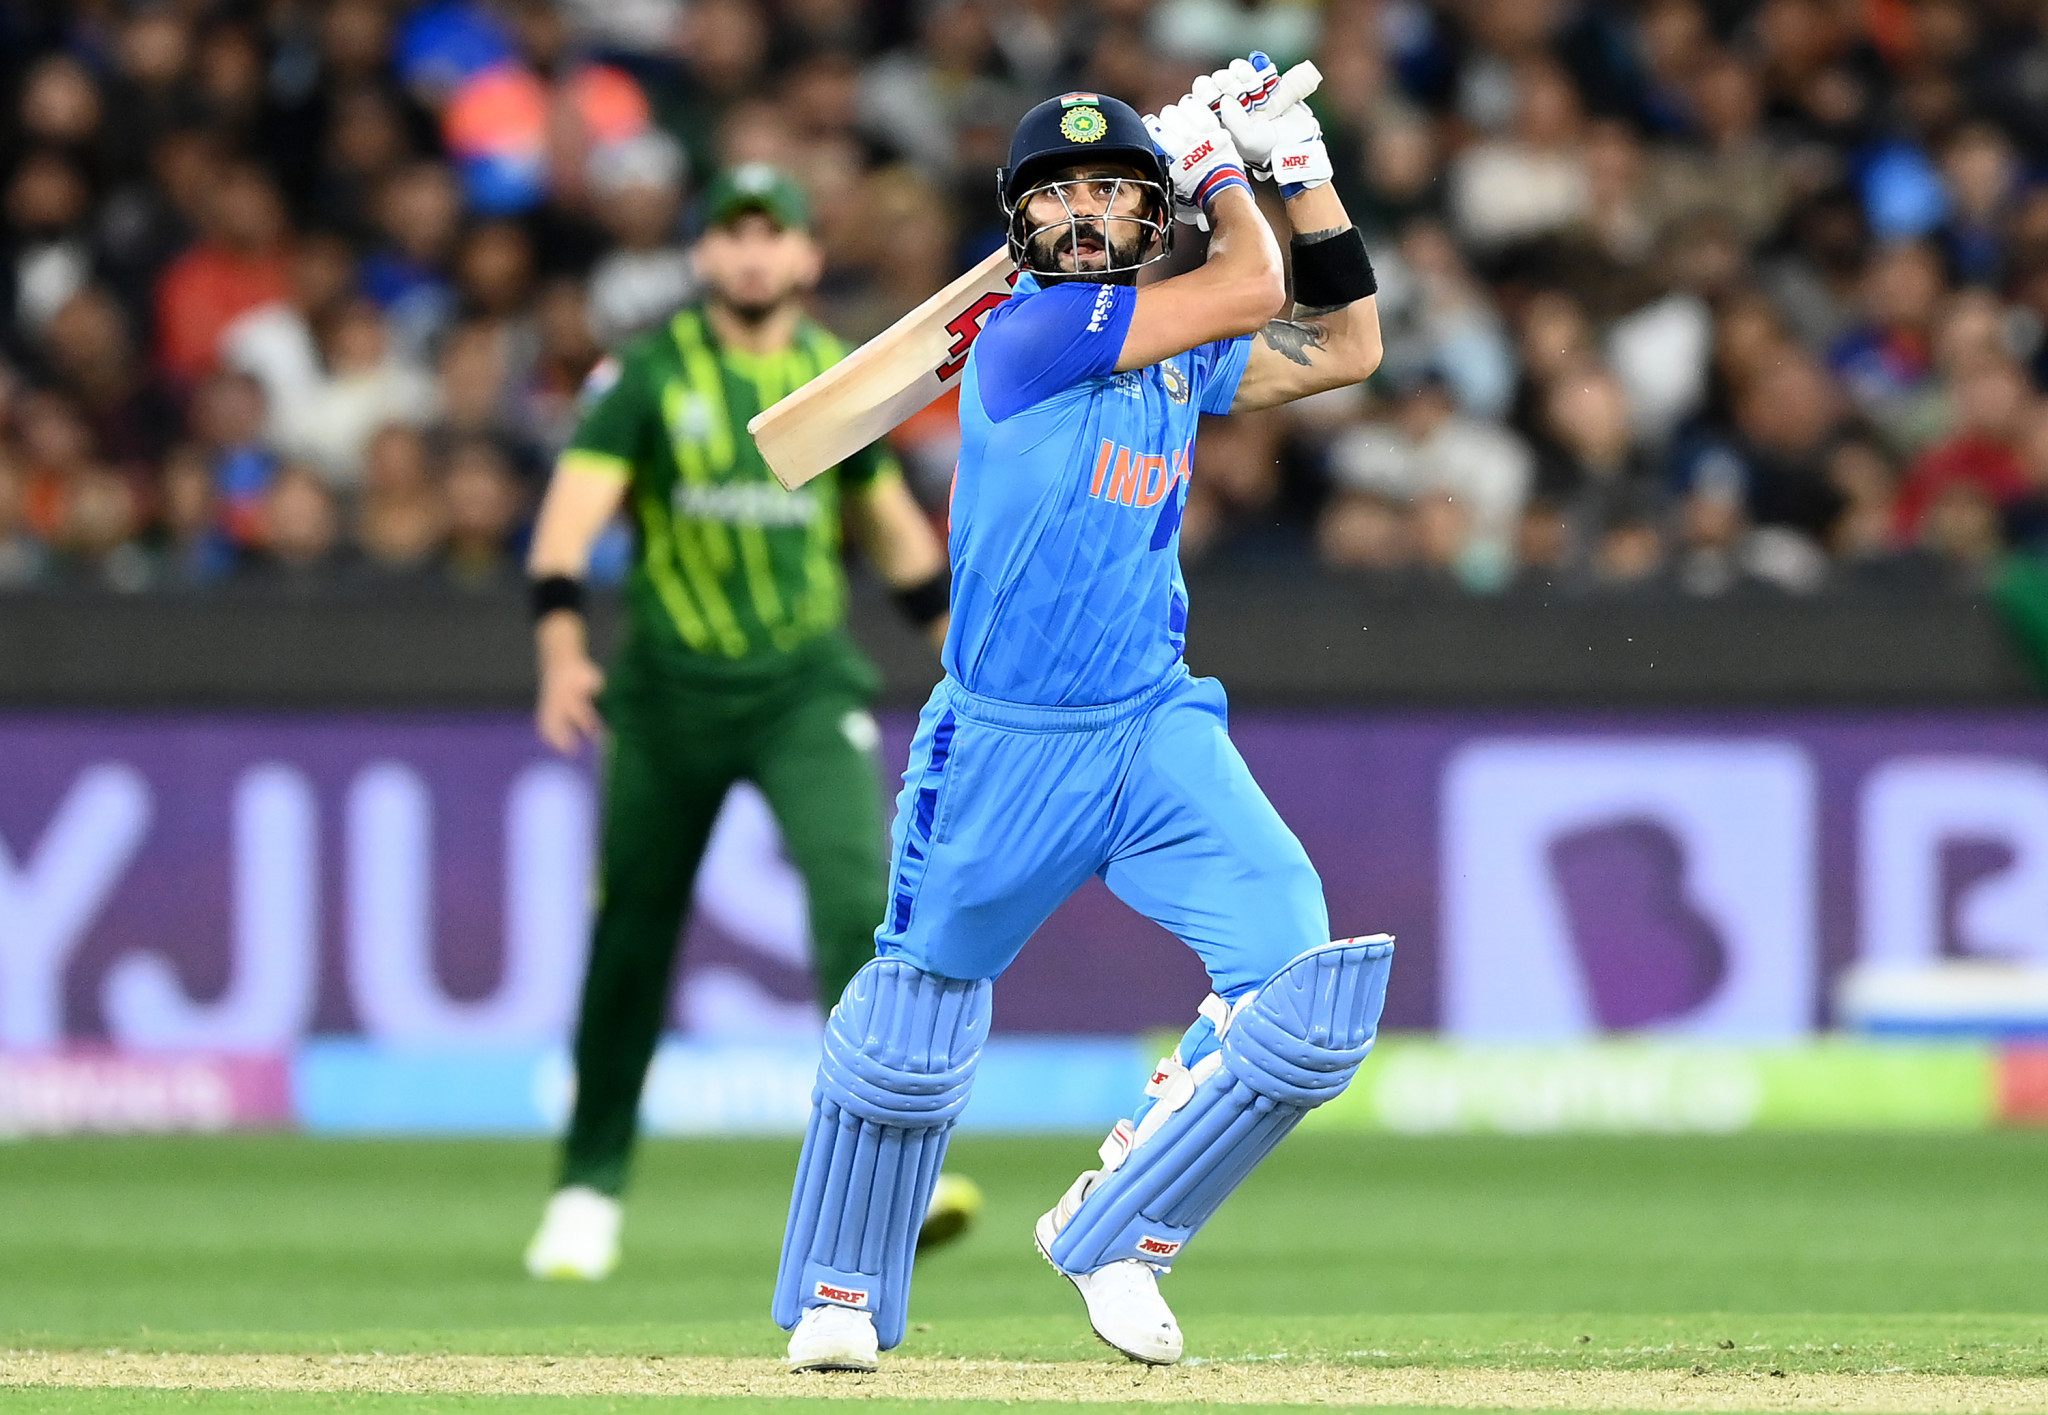 A special innings from Virat Kohli saw India beat Pakistan in one of the T20 World Cup's marquee matches ©Getty Images